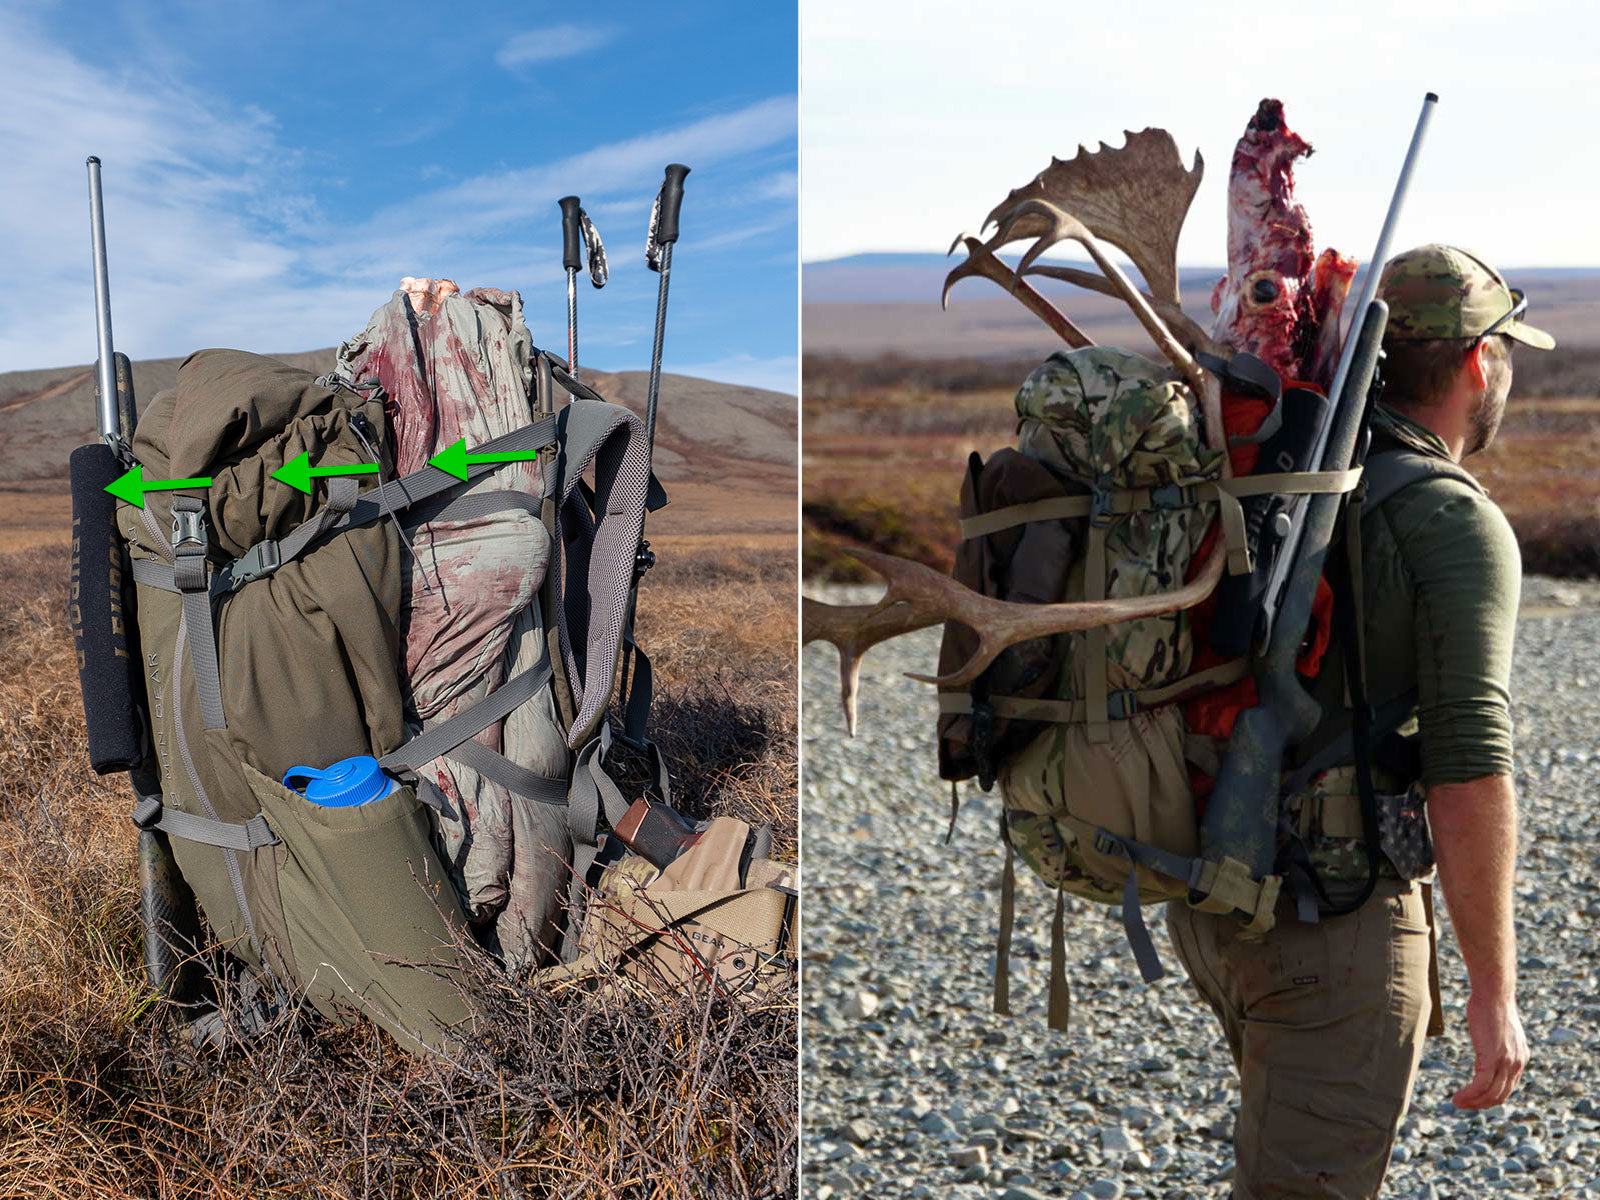 Rifle & Meat on K3 Packs